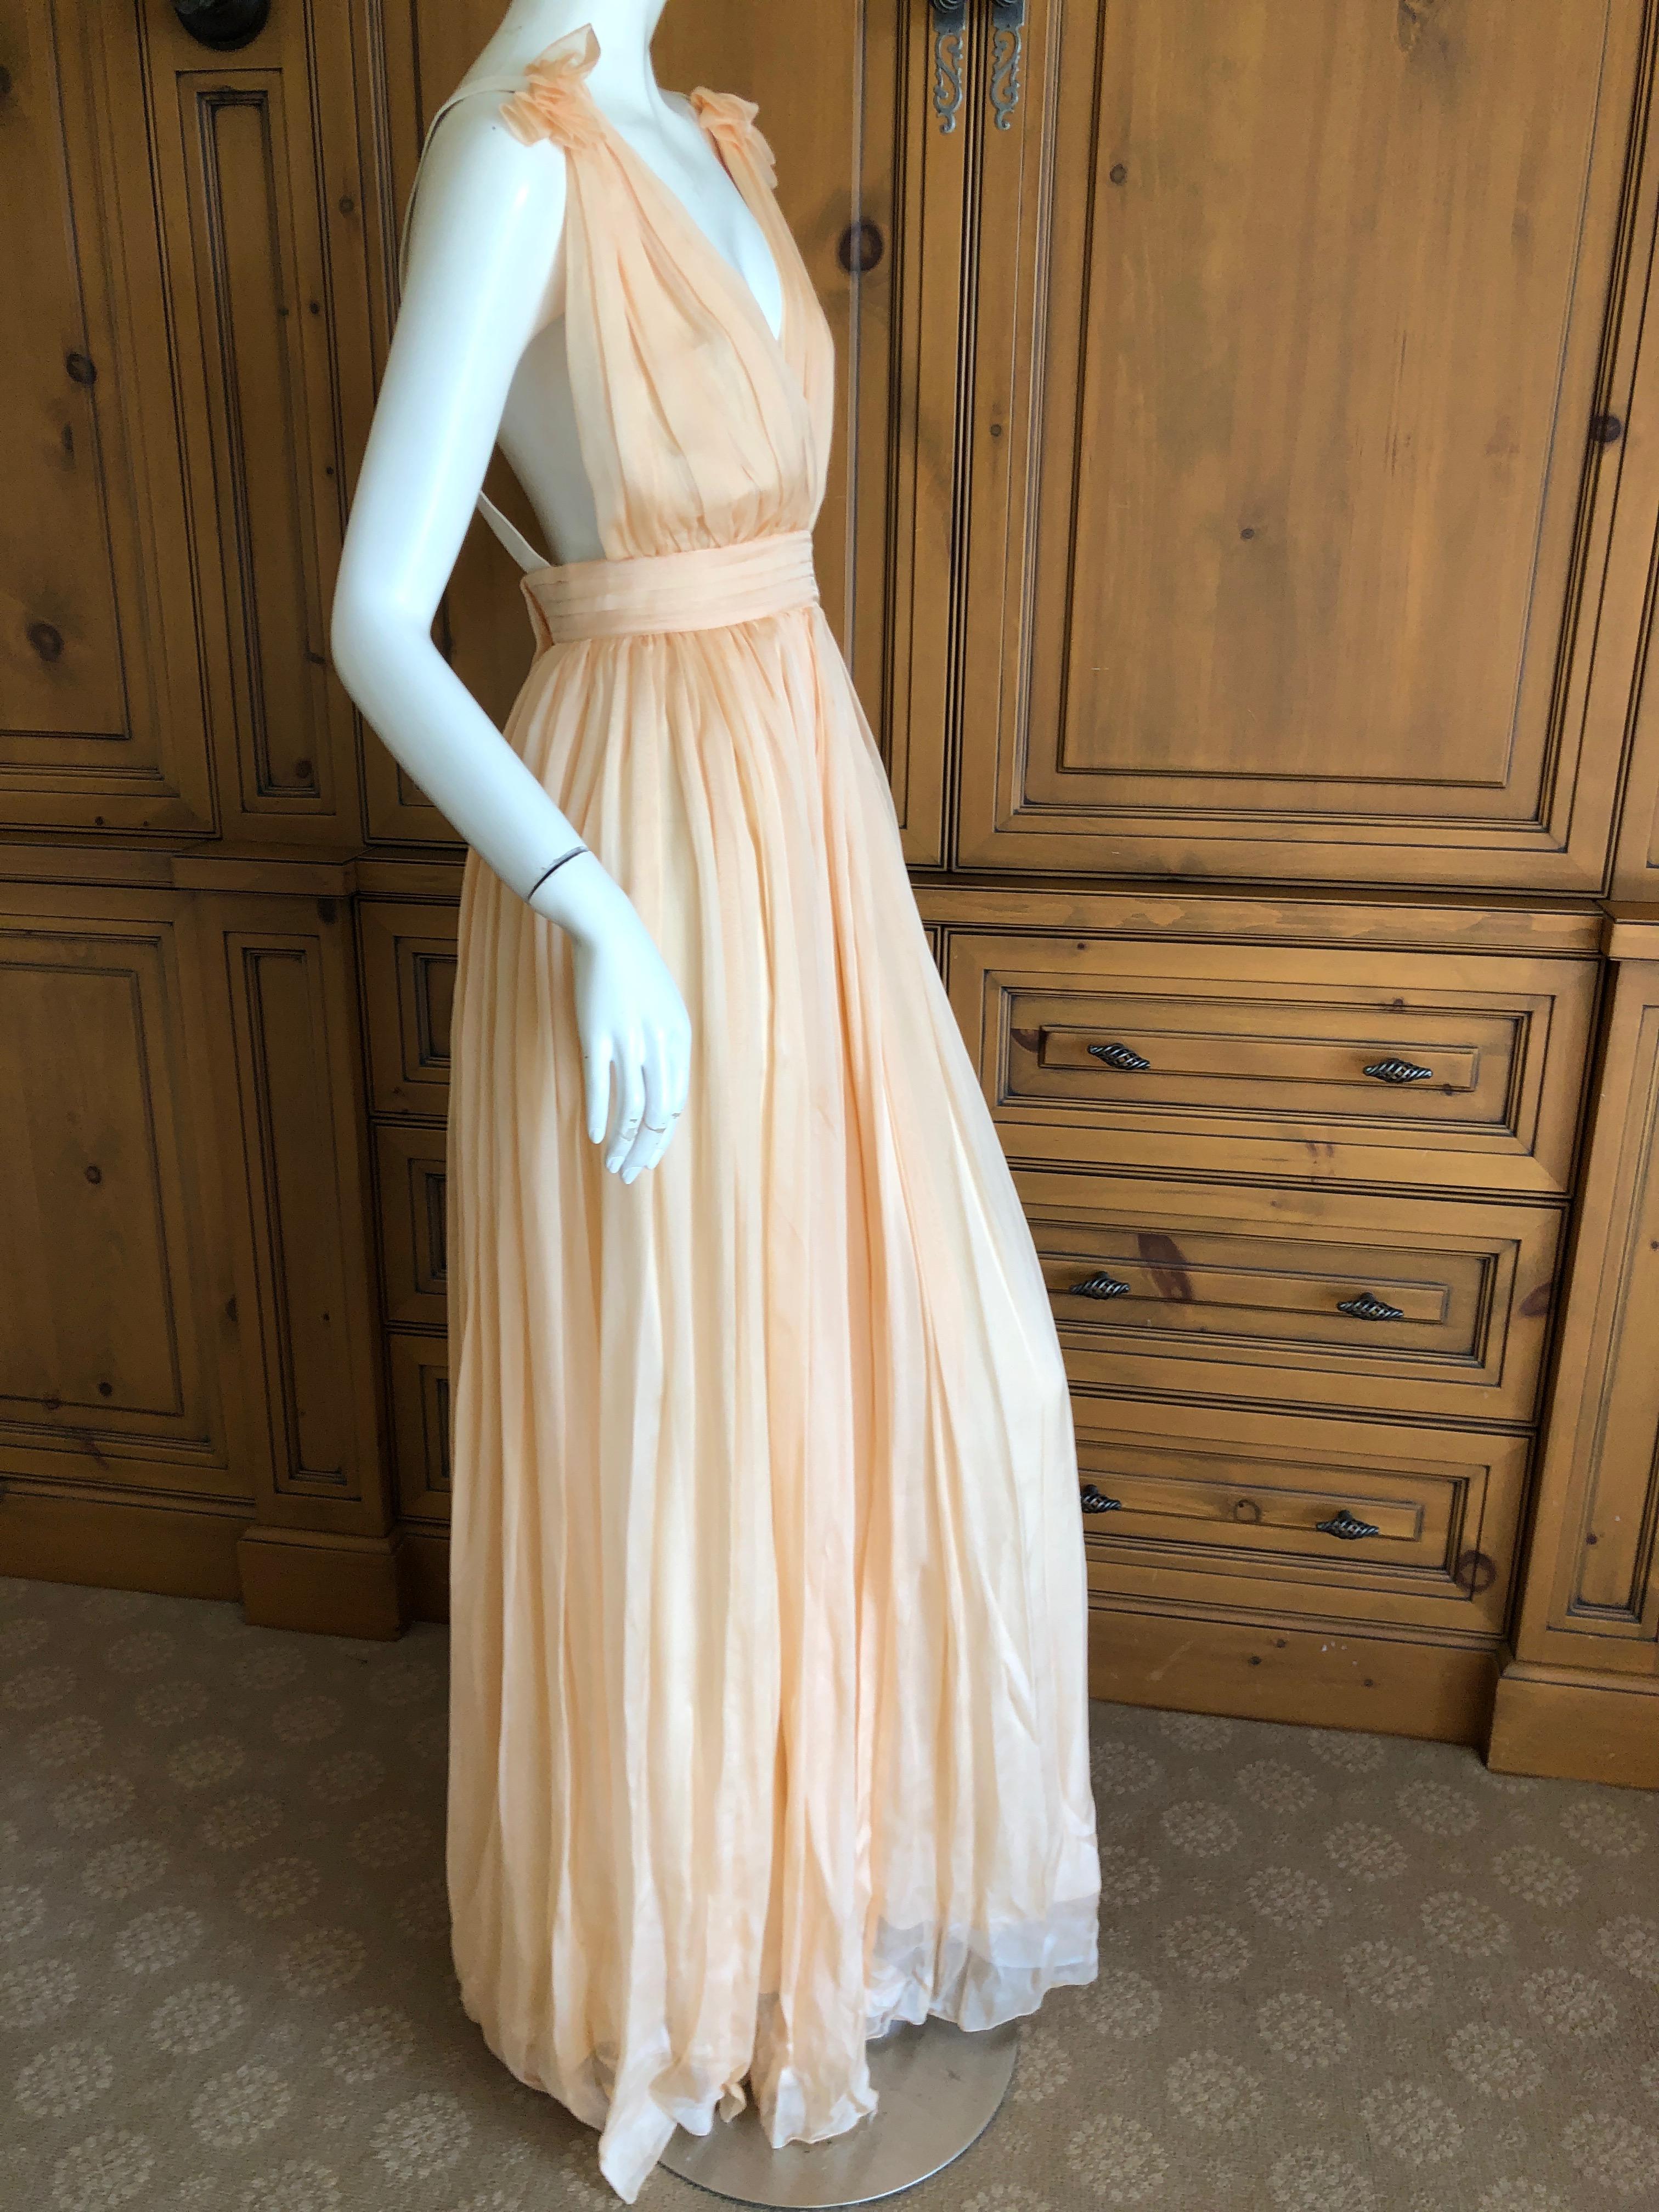 D&G Dolce & Gabbana Romantic Apricot Pink Silk Flowing Low Cut Evening Dress  In Good Condition For Sale In Cloverdale, CA